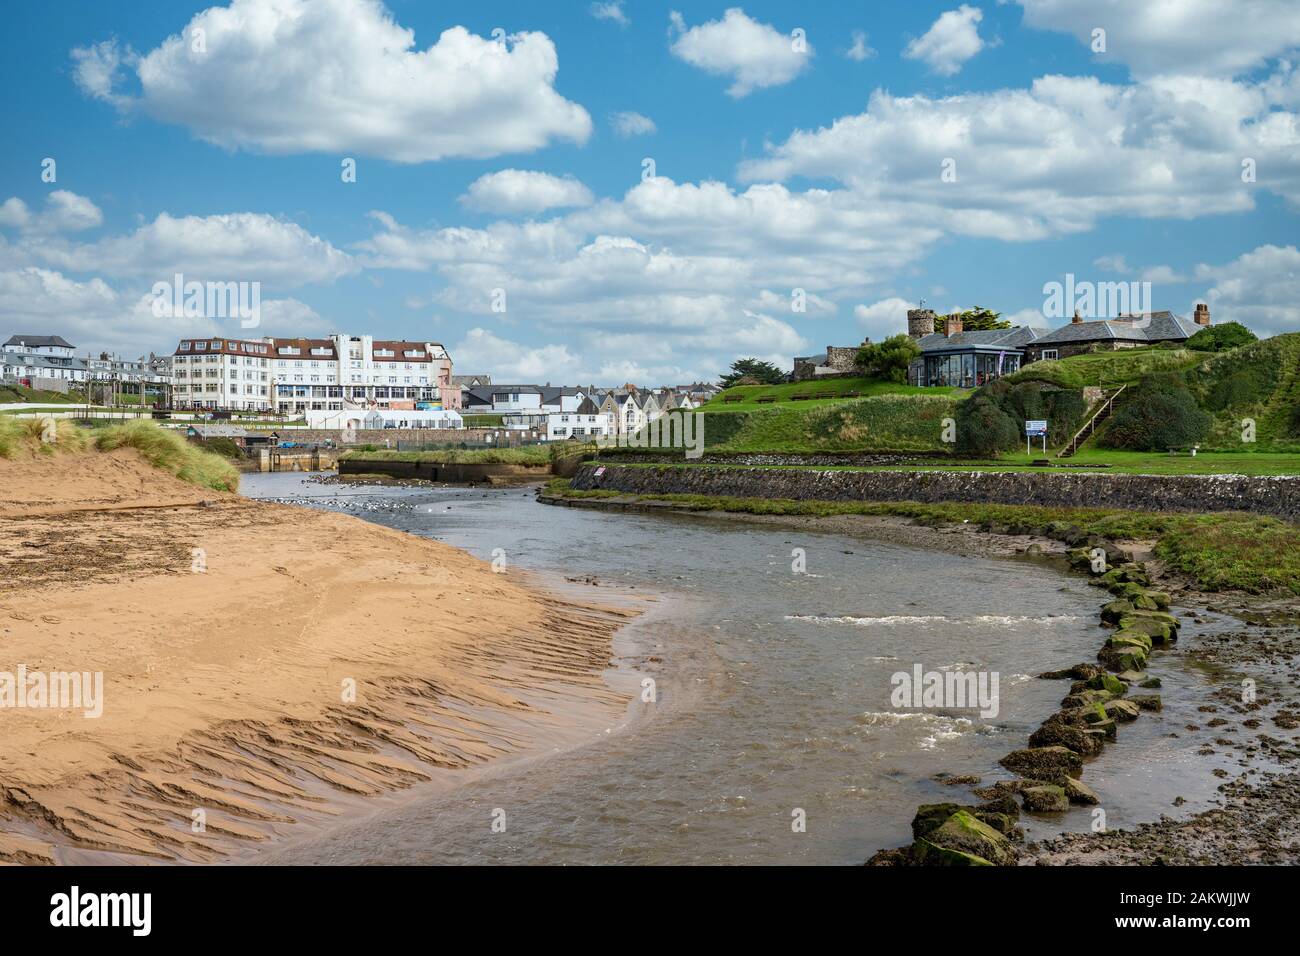 Bude, UK - 1 October 2019: Low tide around the castle museum and tea shop in Bude Stock Photo